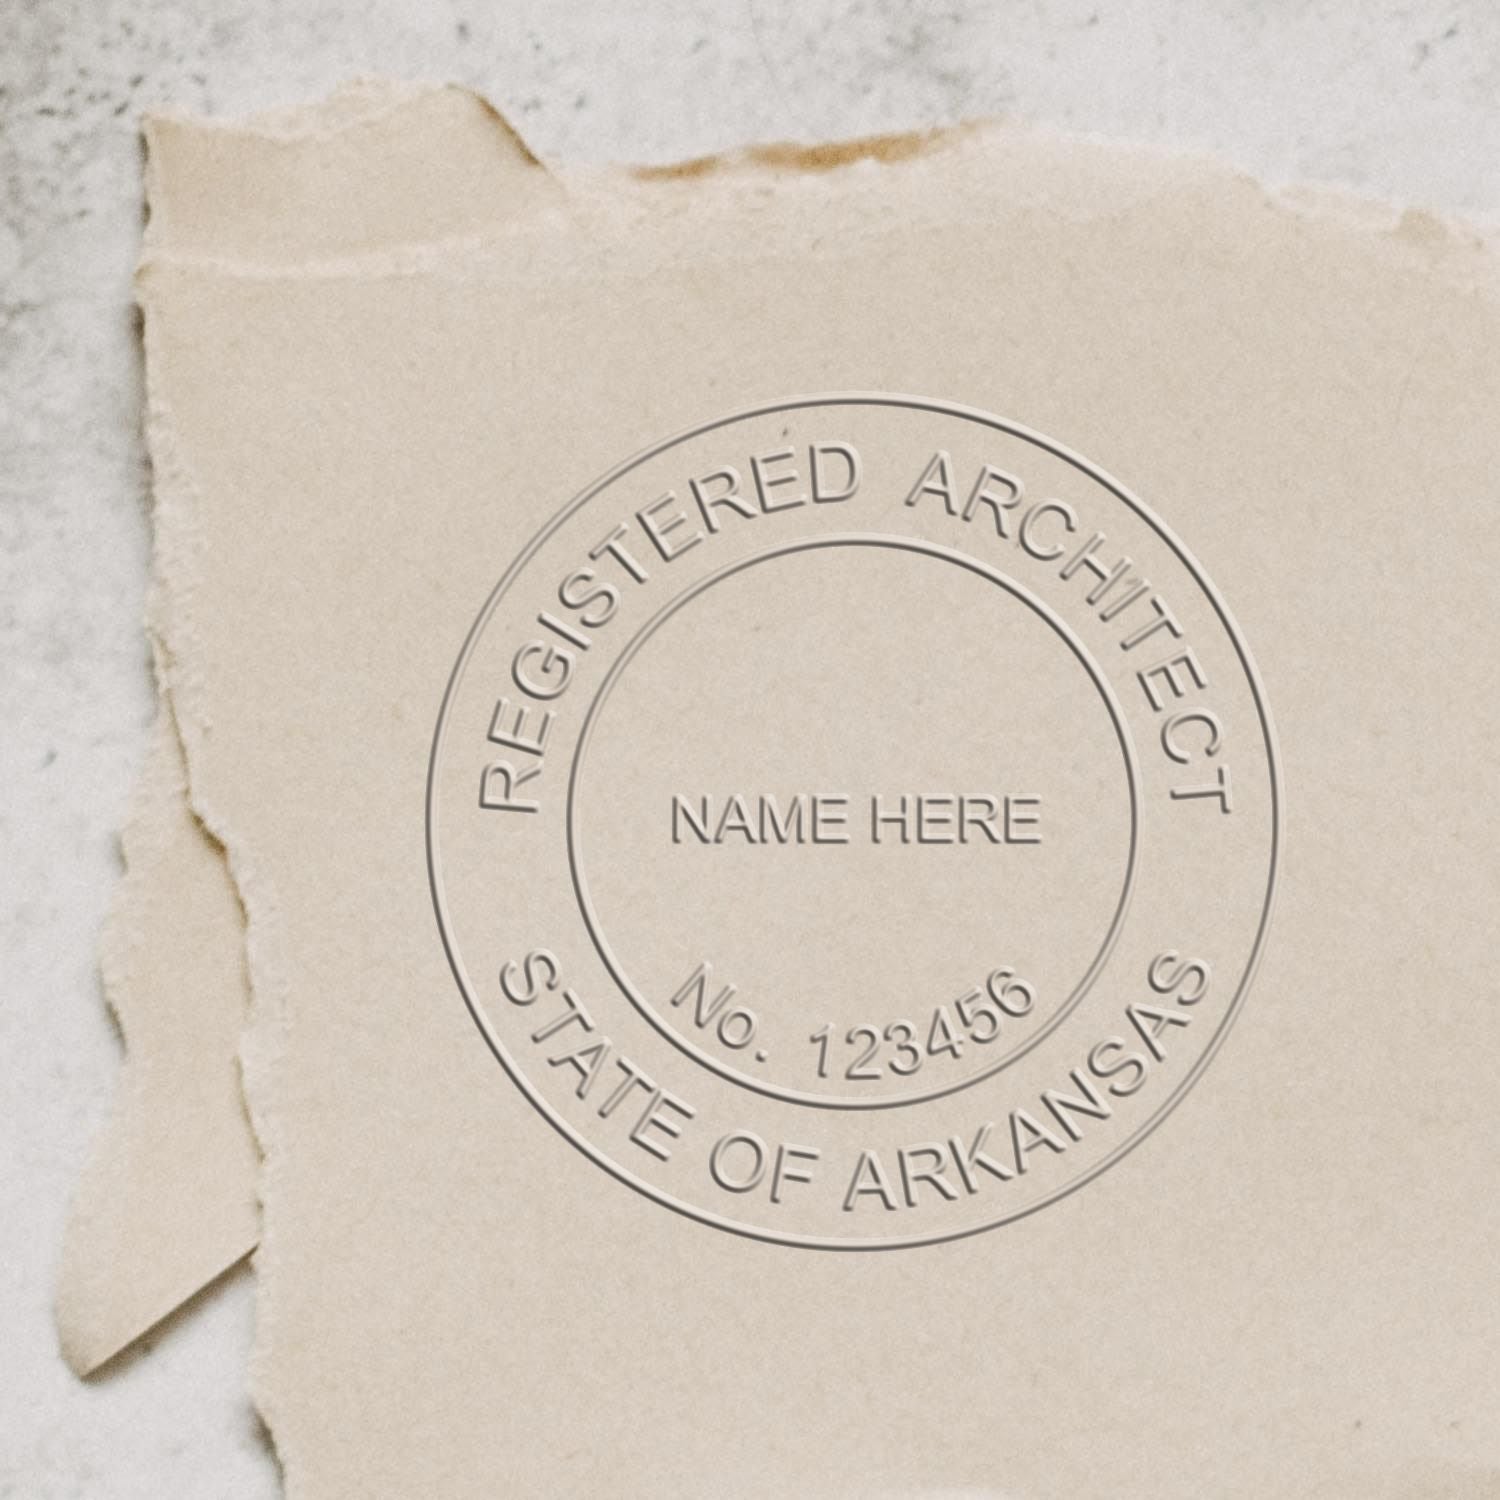 The Gift Arkansas Architect Seal stamp impression comes to life with a crisp, detailed image stamped on paper - showcasing true professional quality.